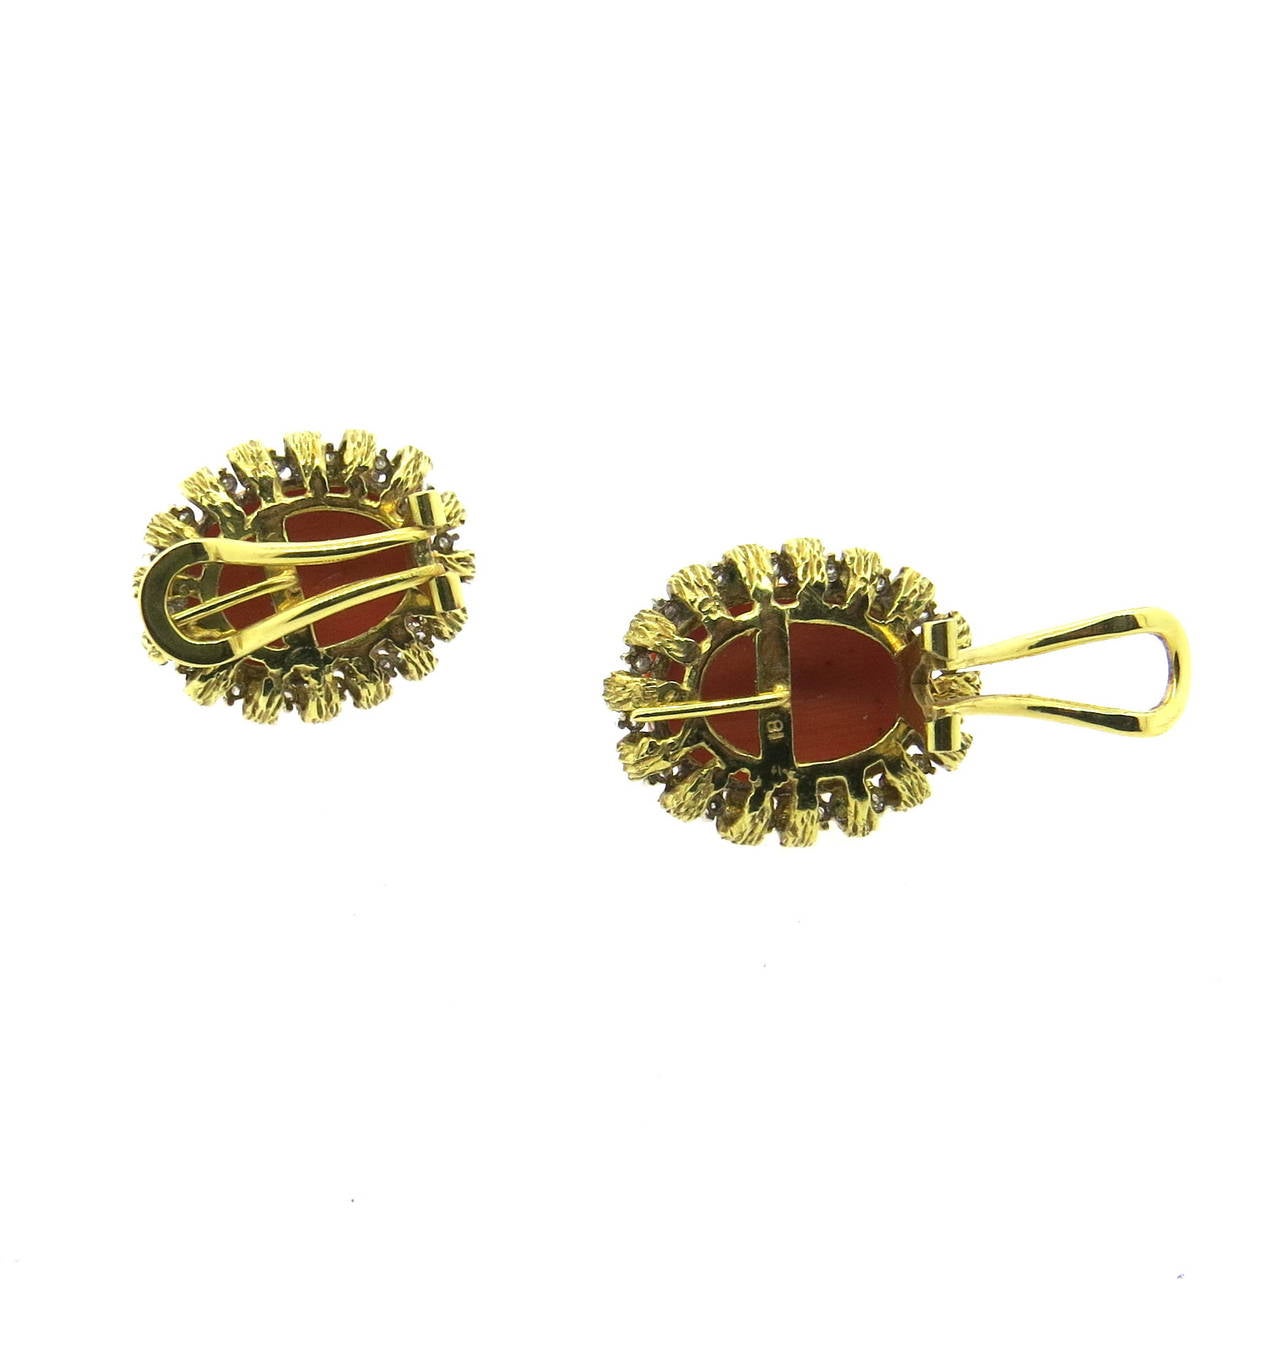 Vintage 18k gold earrings, set with 20mm x 14.7mm carved coral stones in the center, surrounded with diamonds. Earrings measure 25mm x 20mm.  Weight - 21.8 grams